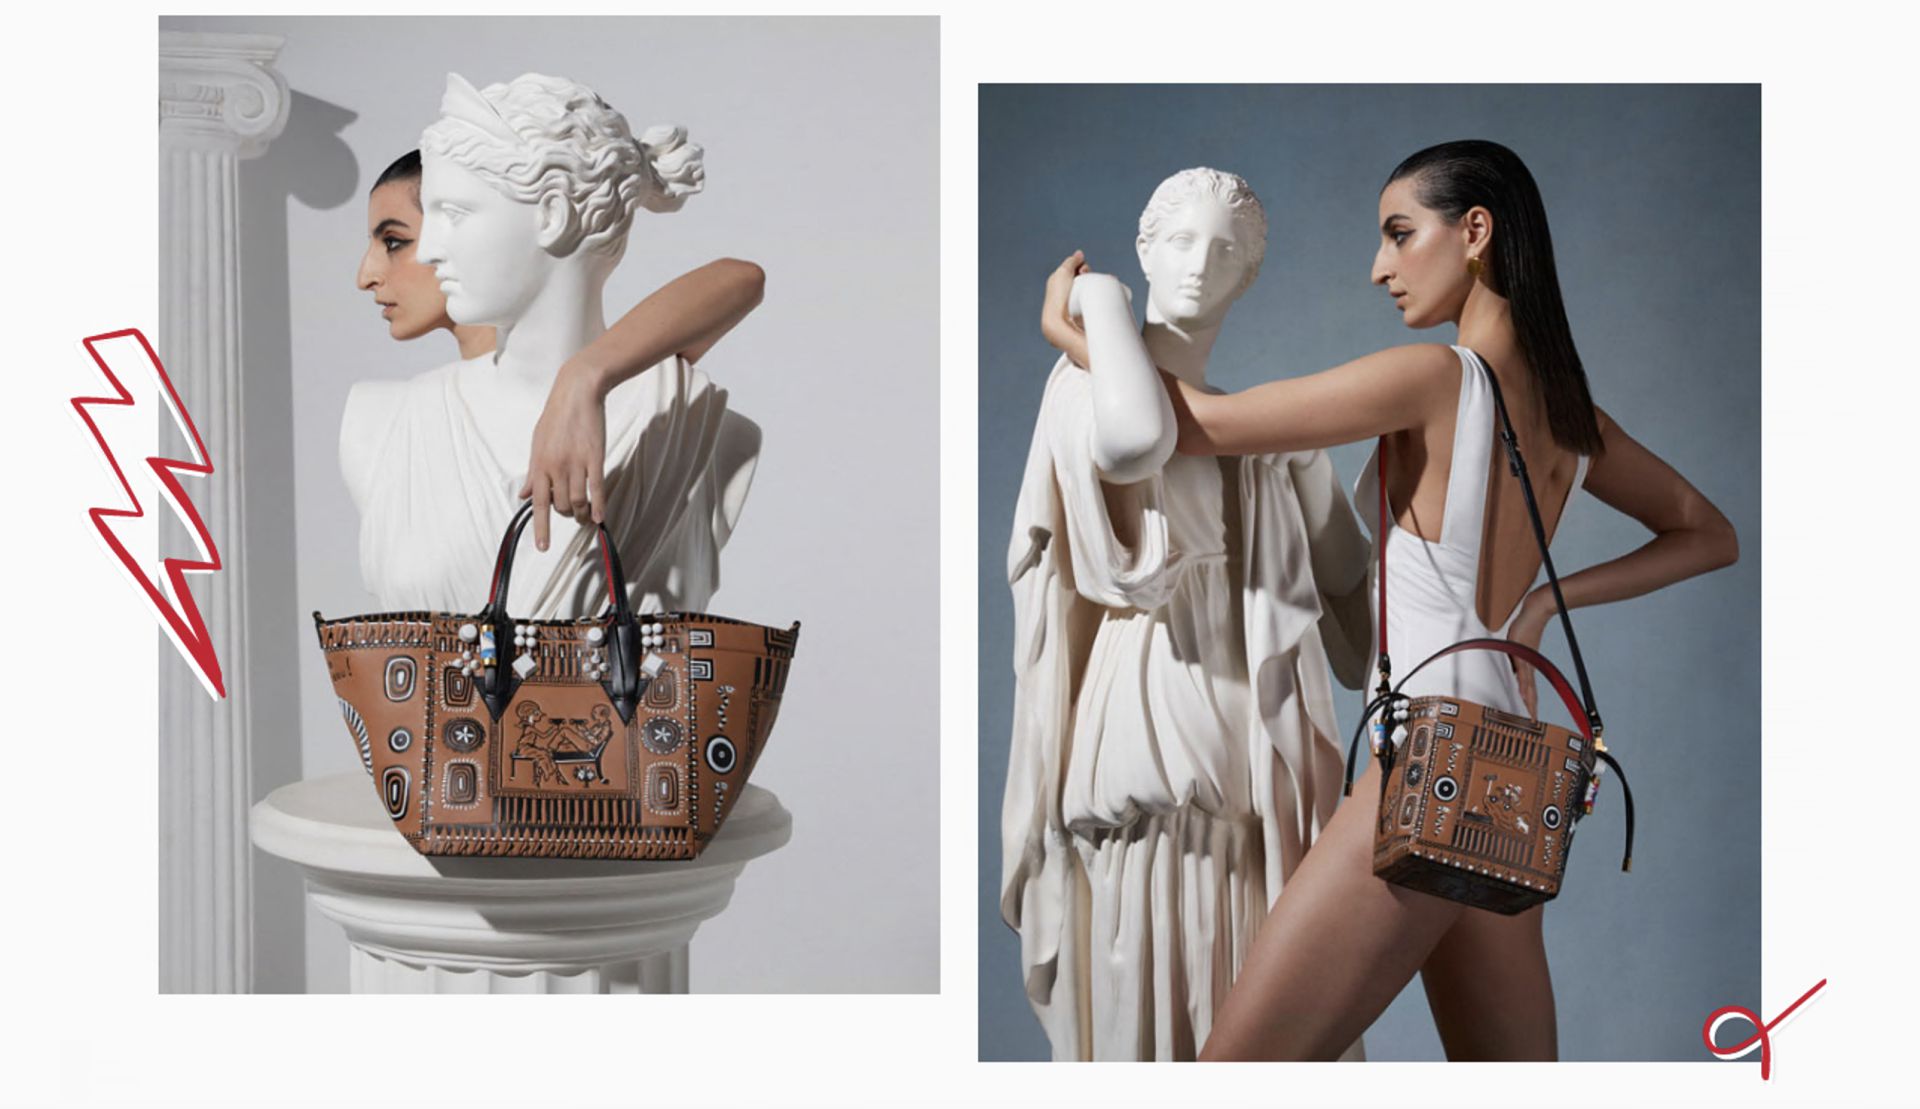 Christian louboutin brings ancient greek civilization to life in the new greekaba bag version